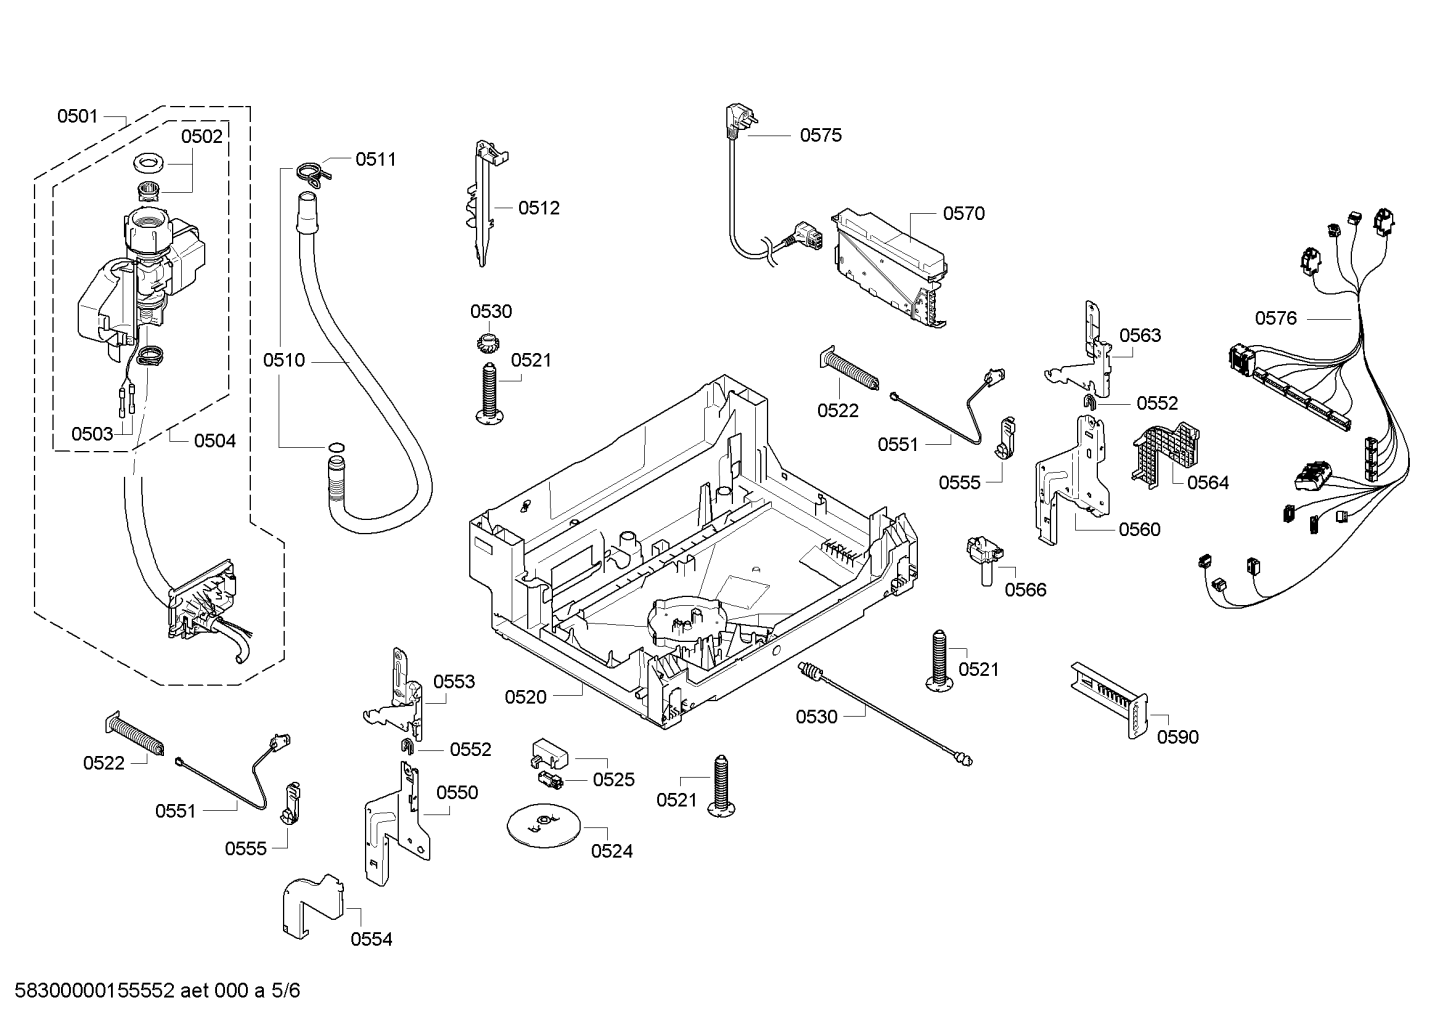 drawing_link_3_device_1598741